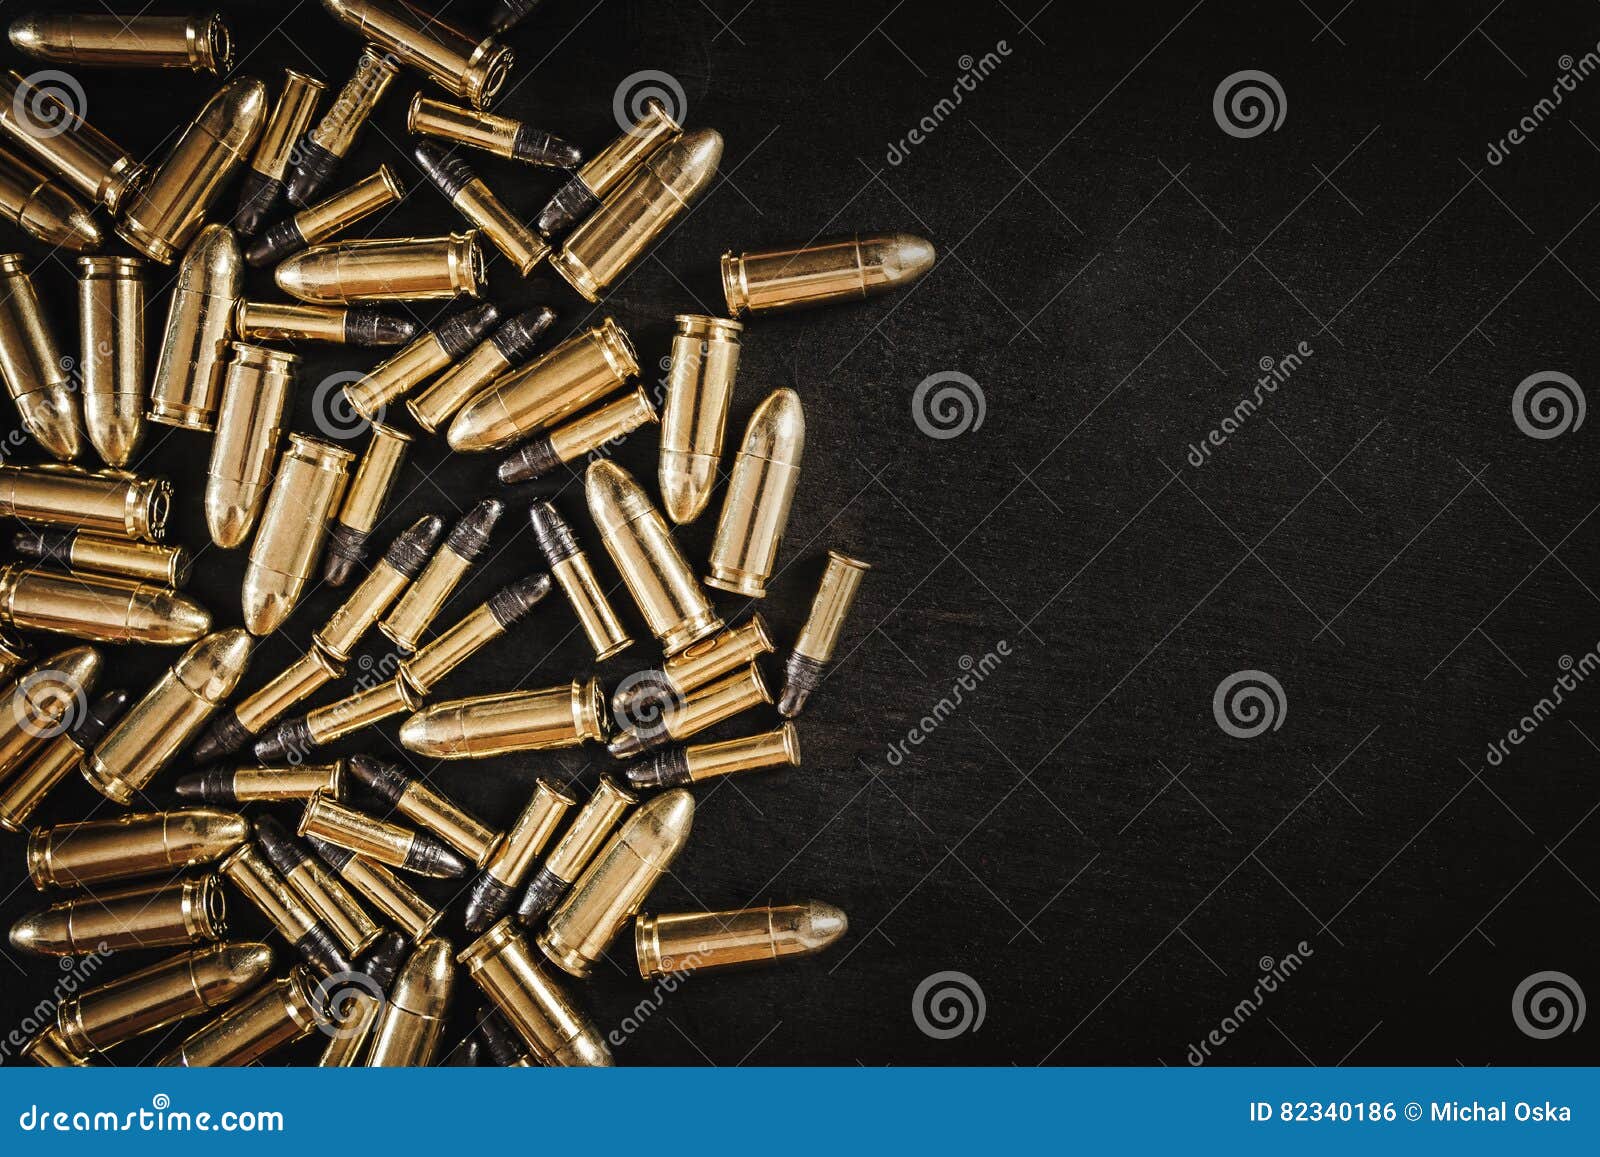 bullets from the gun on the table